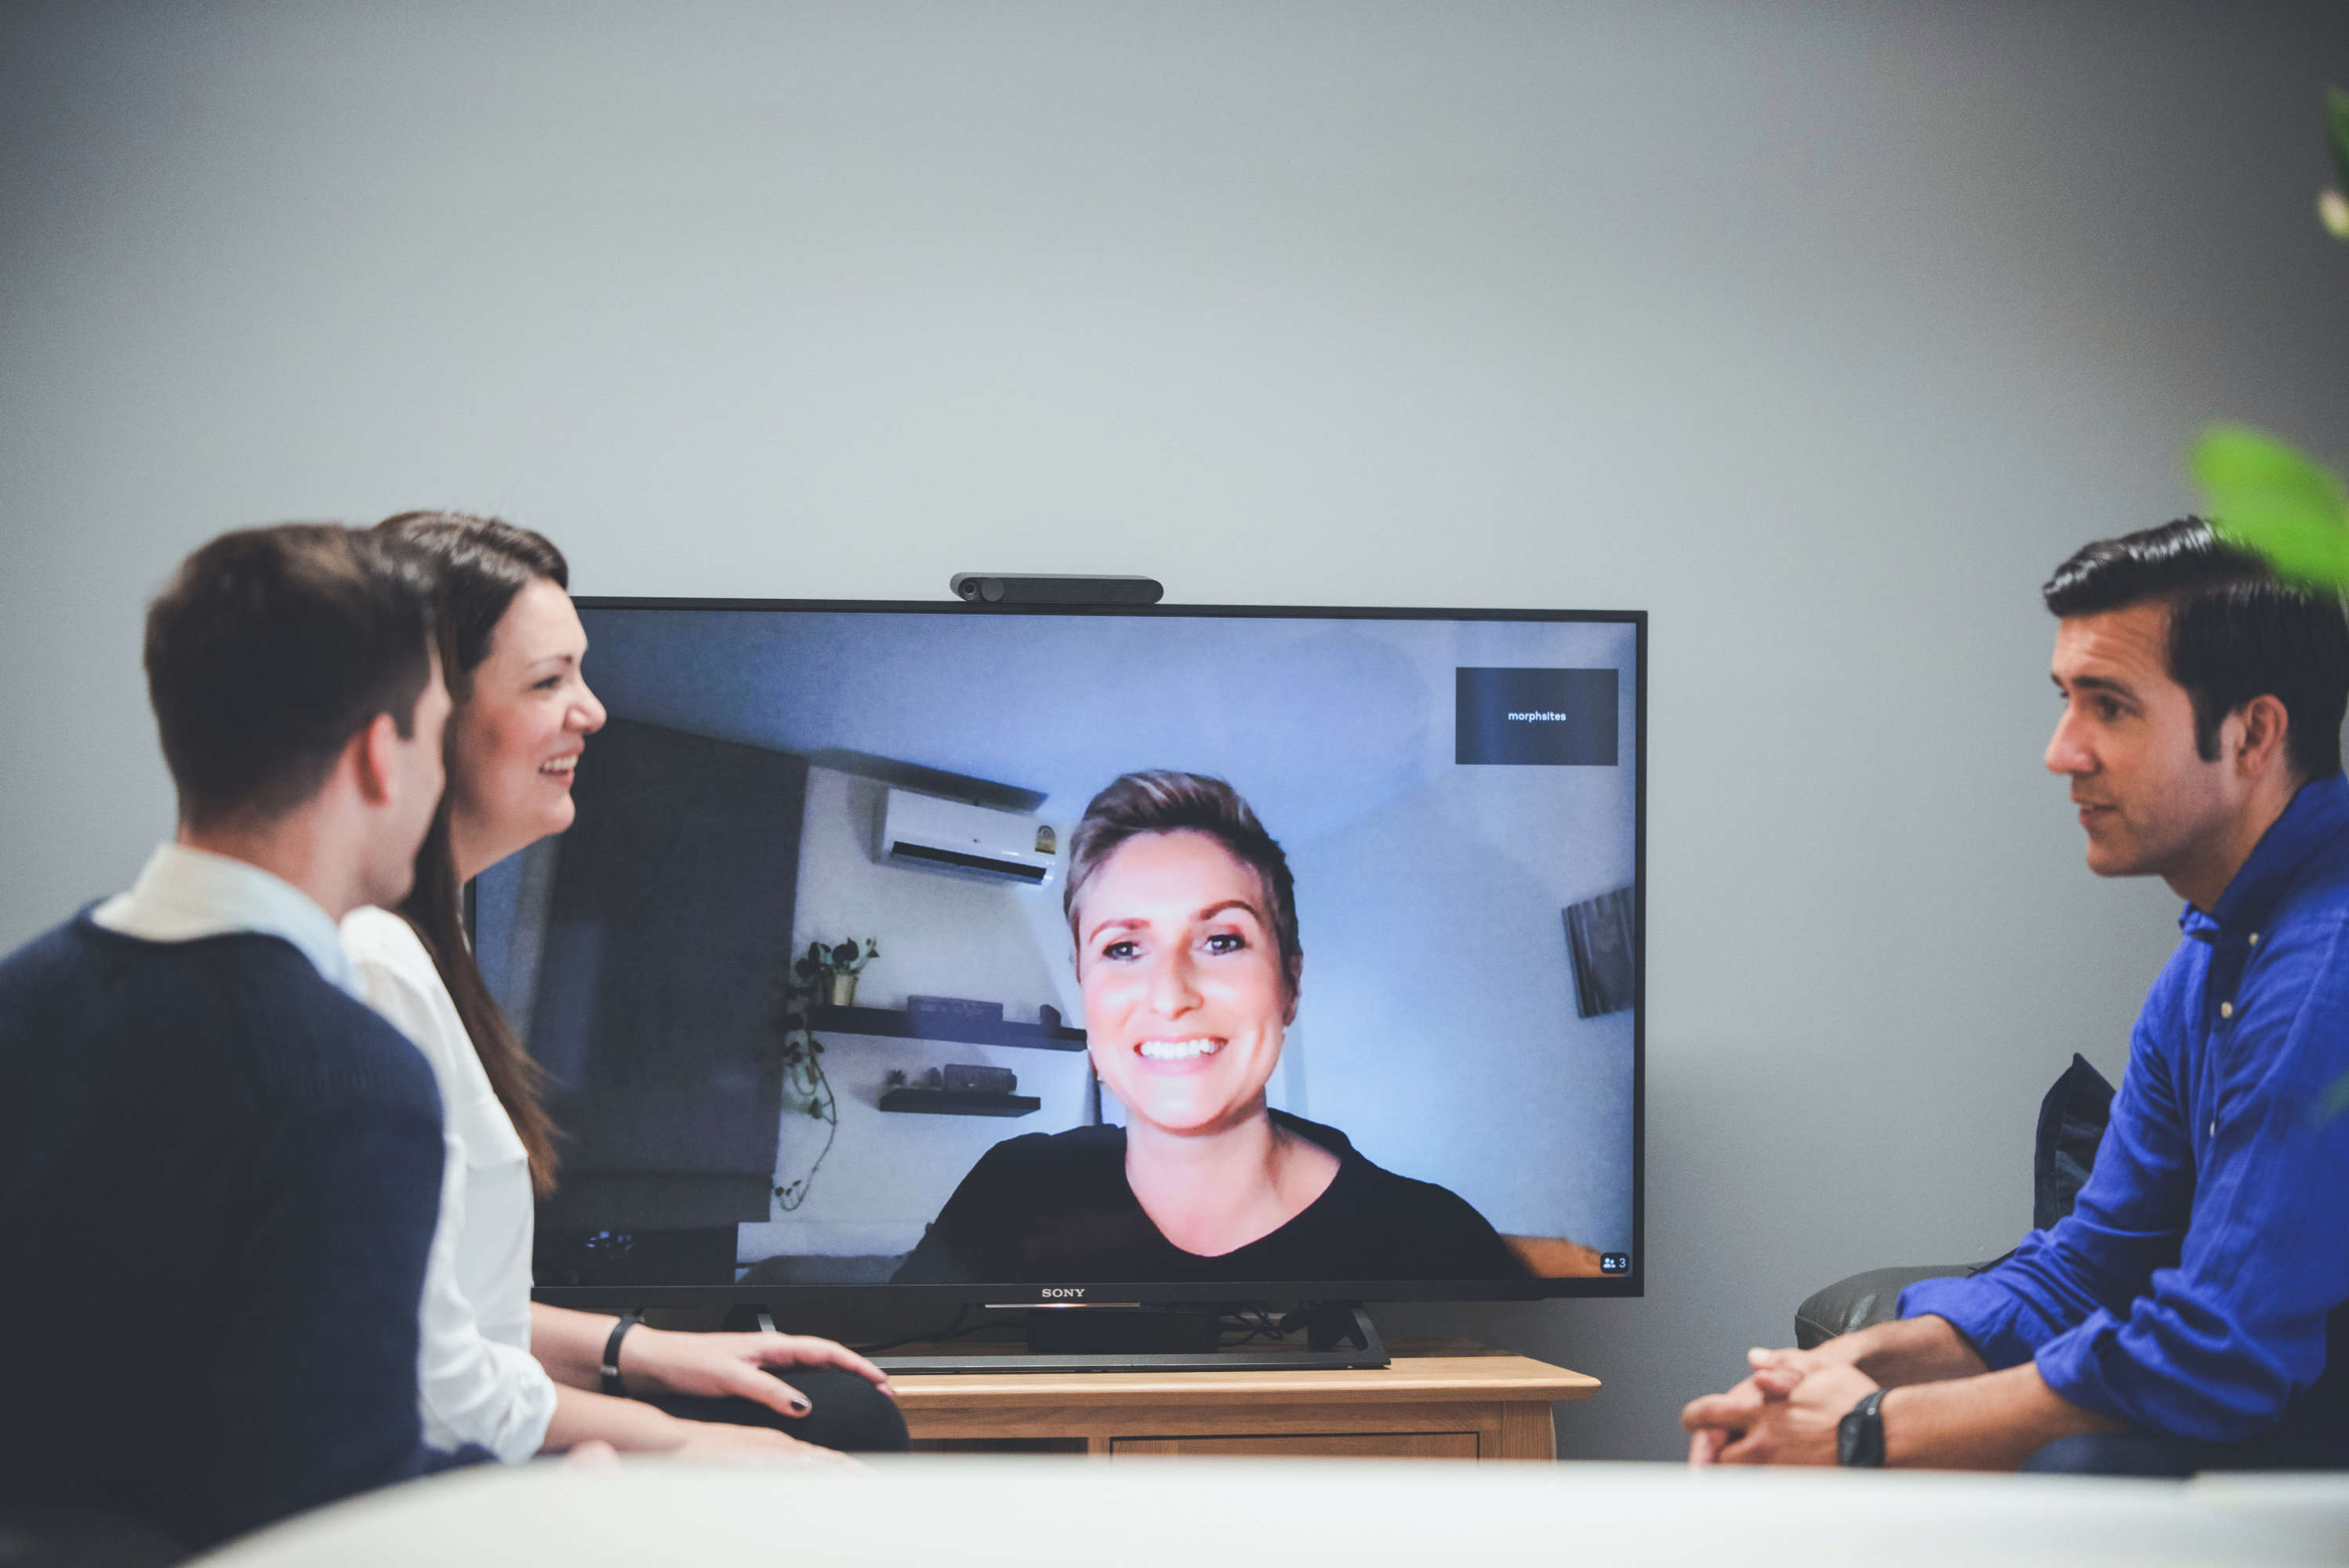 Three team members catchup with a colleague working remotely via video call.